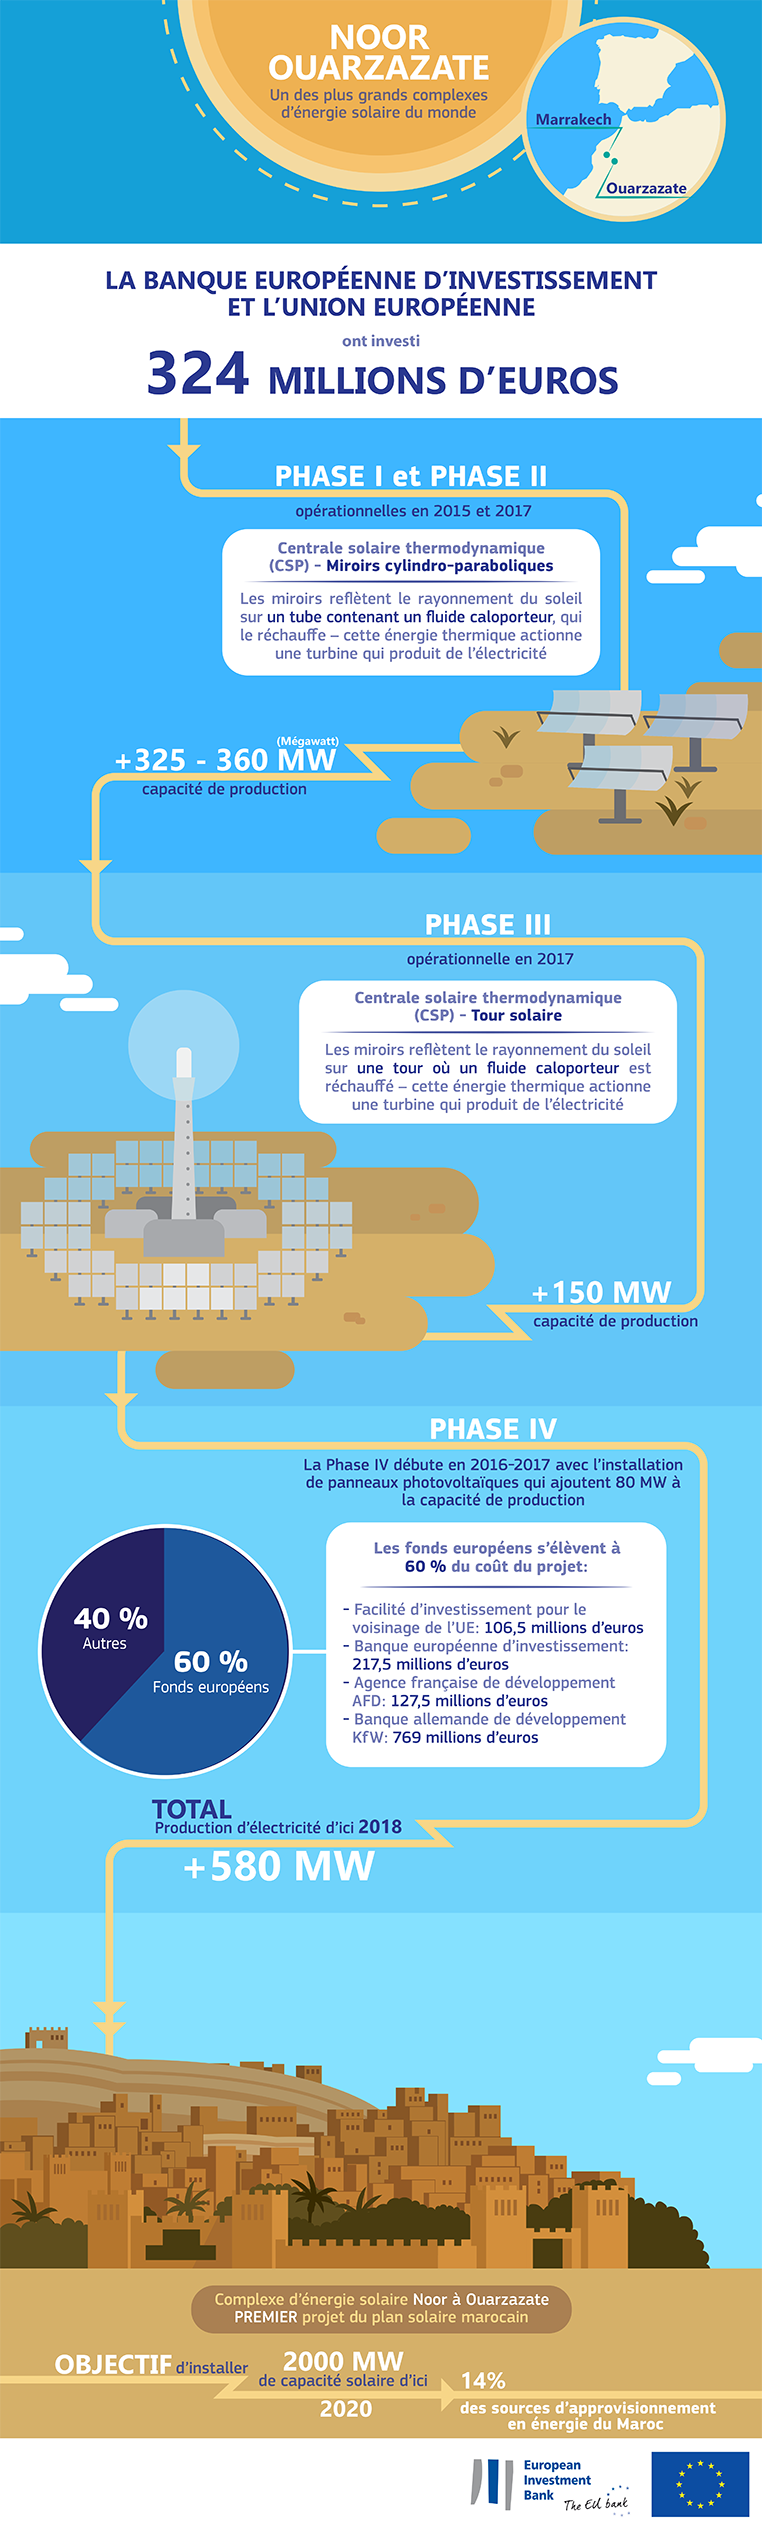 NOOR Ouarzazate - One of the world's biggest solar power complexes (infographic)